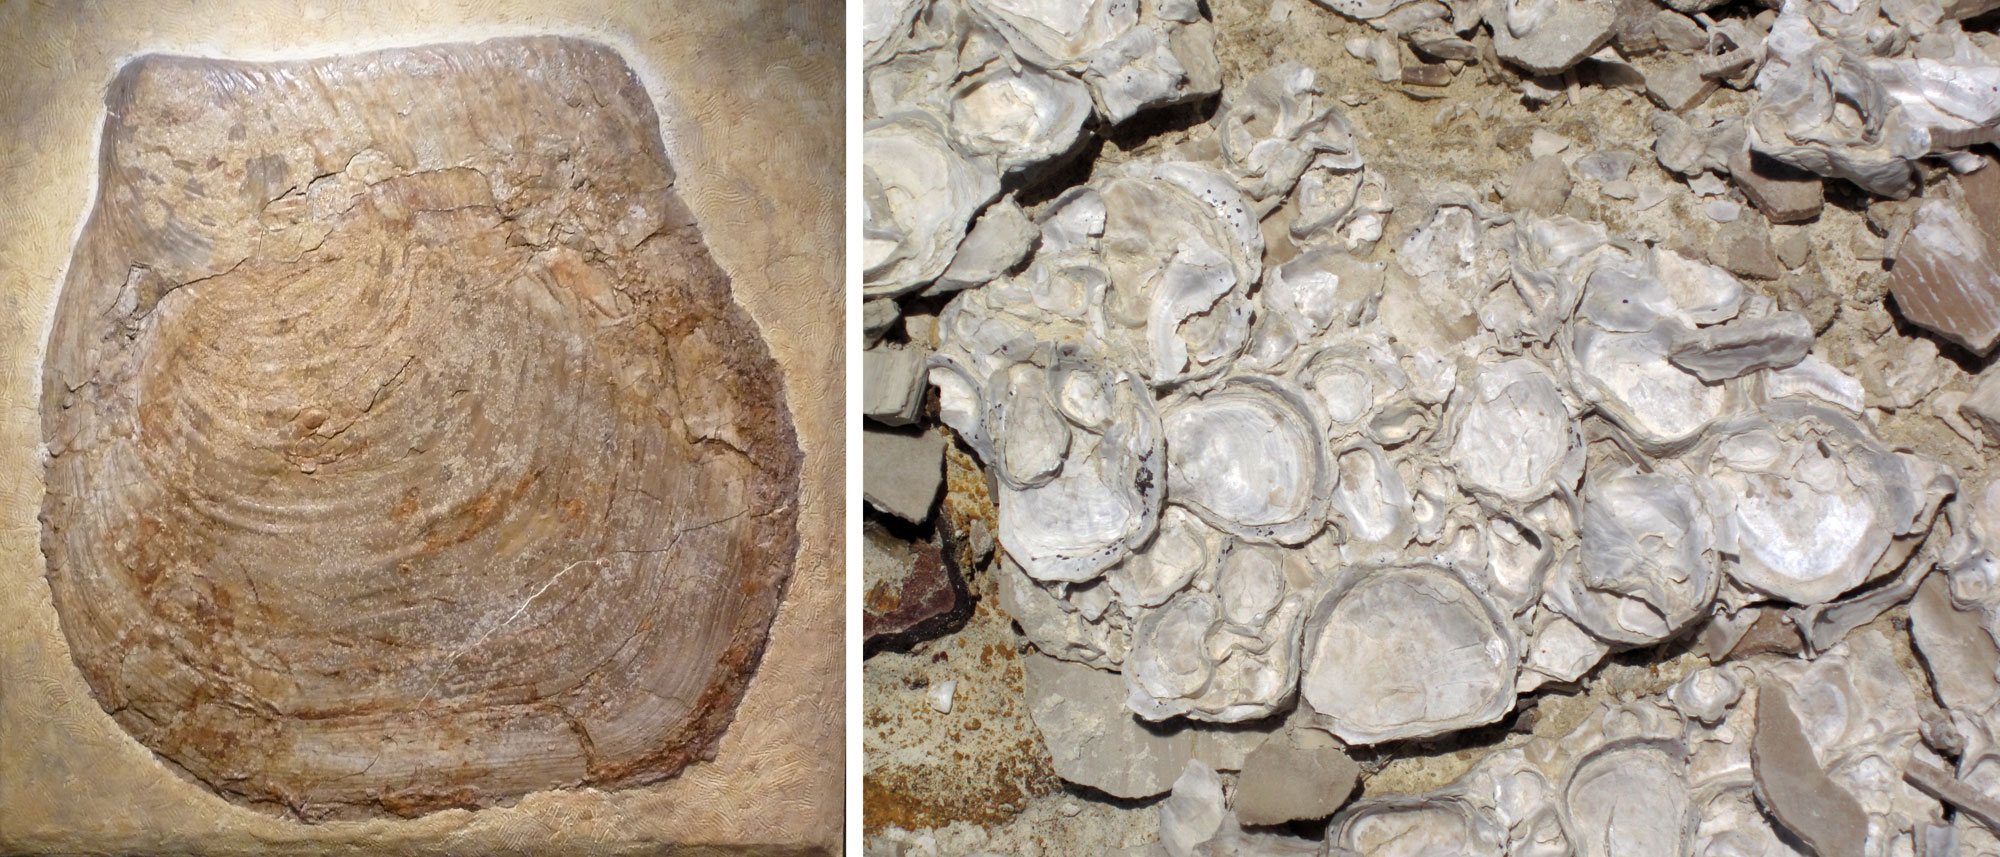 2-panel image showing photos of Cretaceous oyster shells. Panel 1: A single giant oyster on display. Panel 2: Small oyster shells encrusting the shell of a larger oyster.